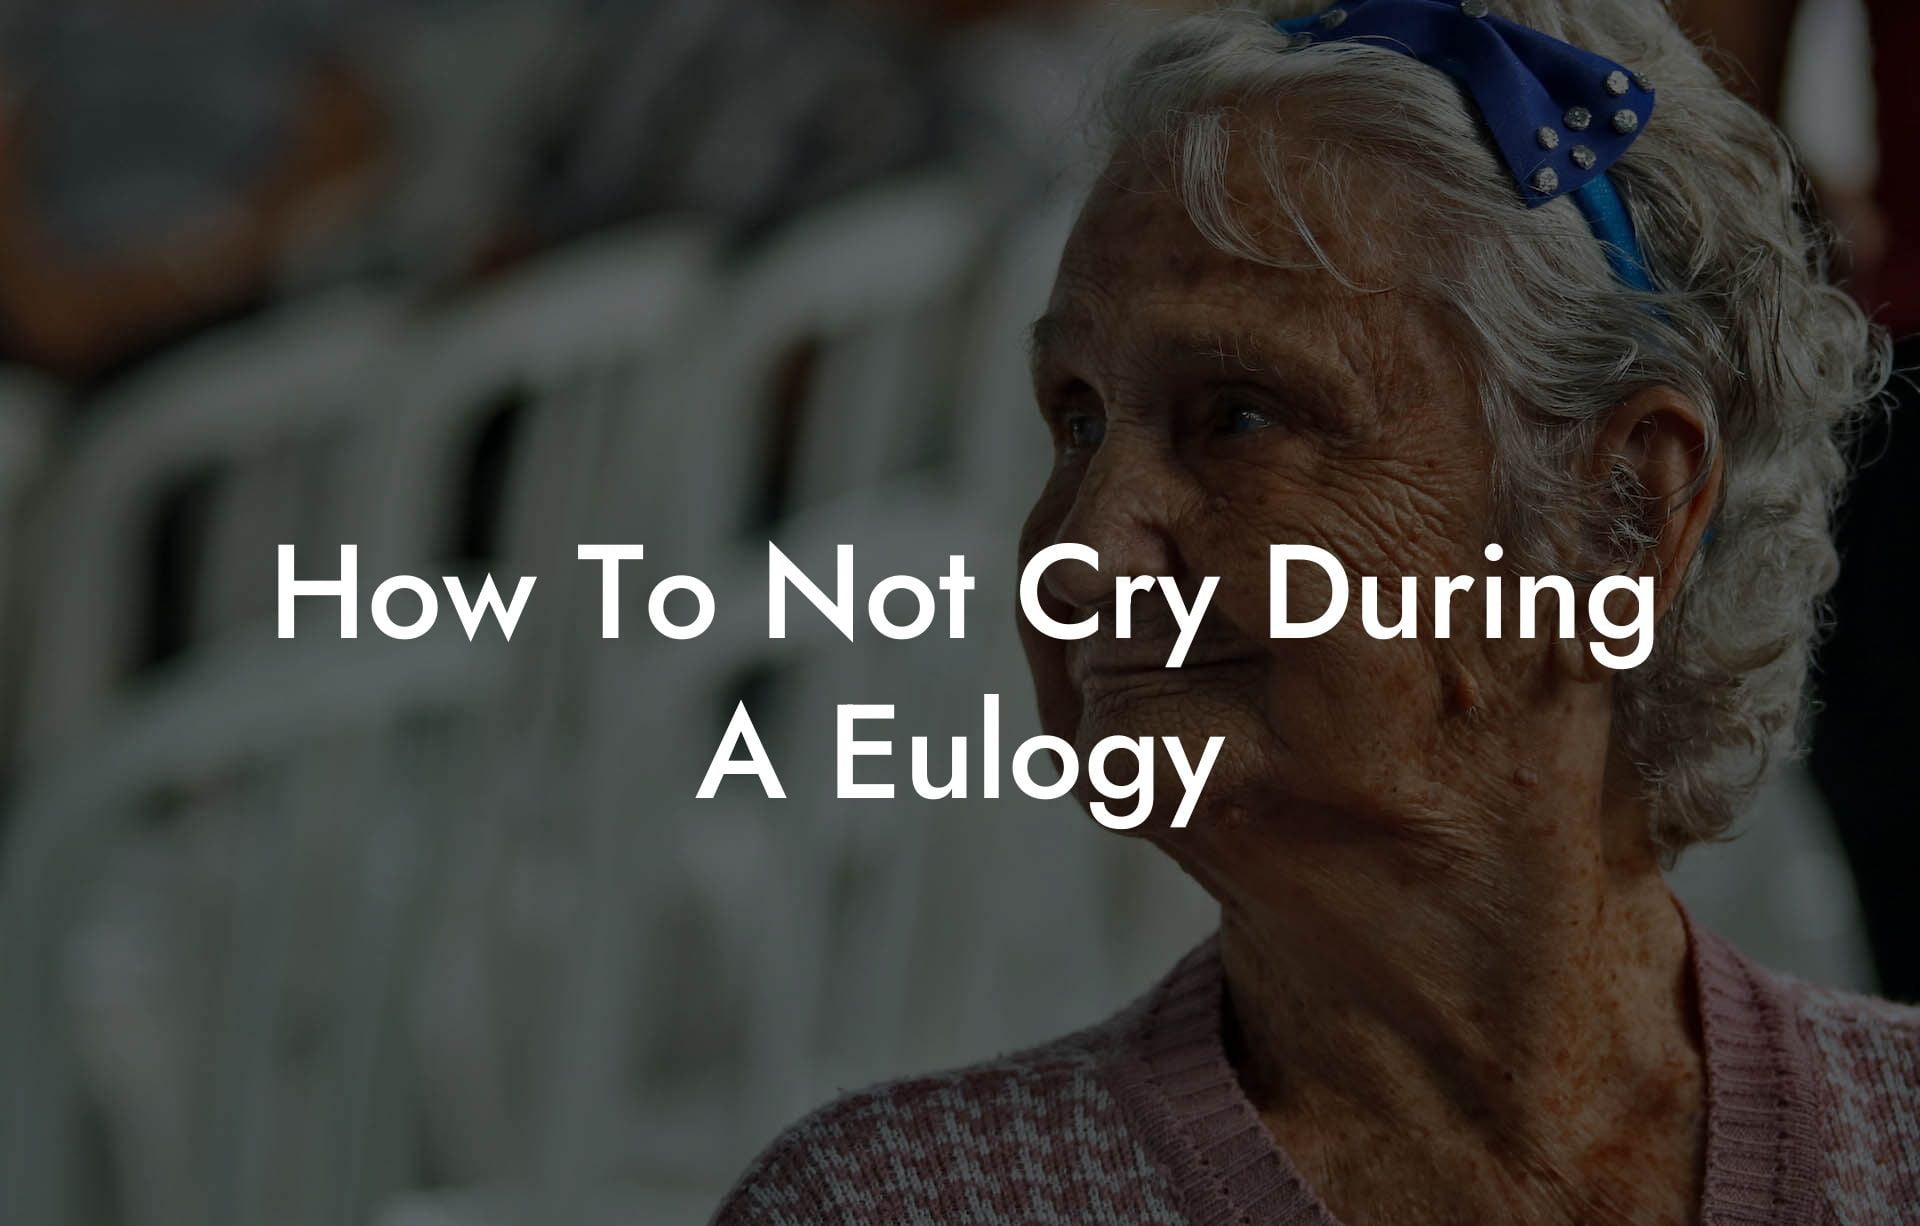 How To Not Cry During A Eulogy